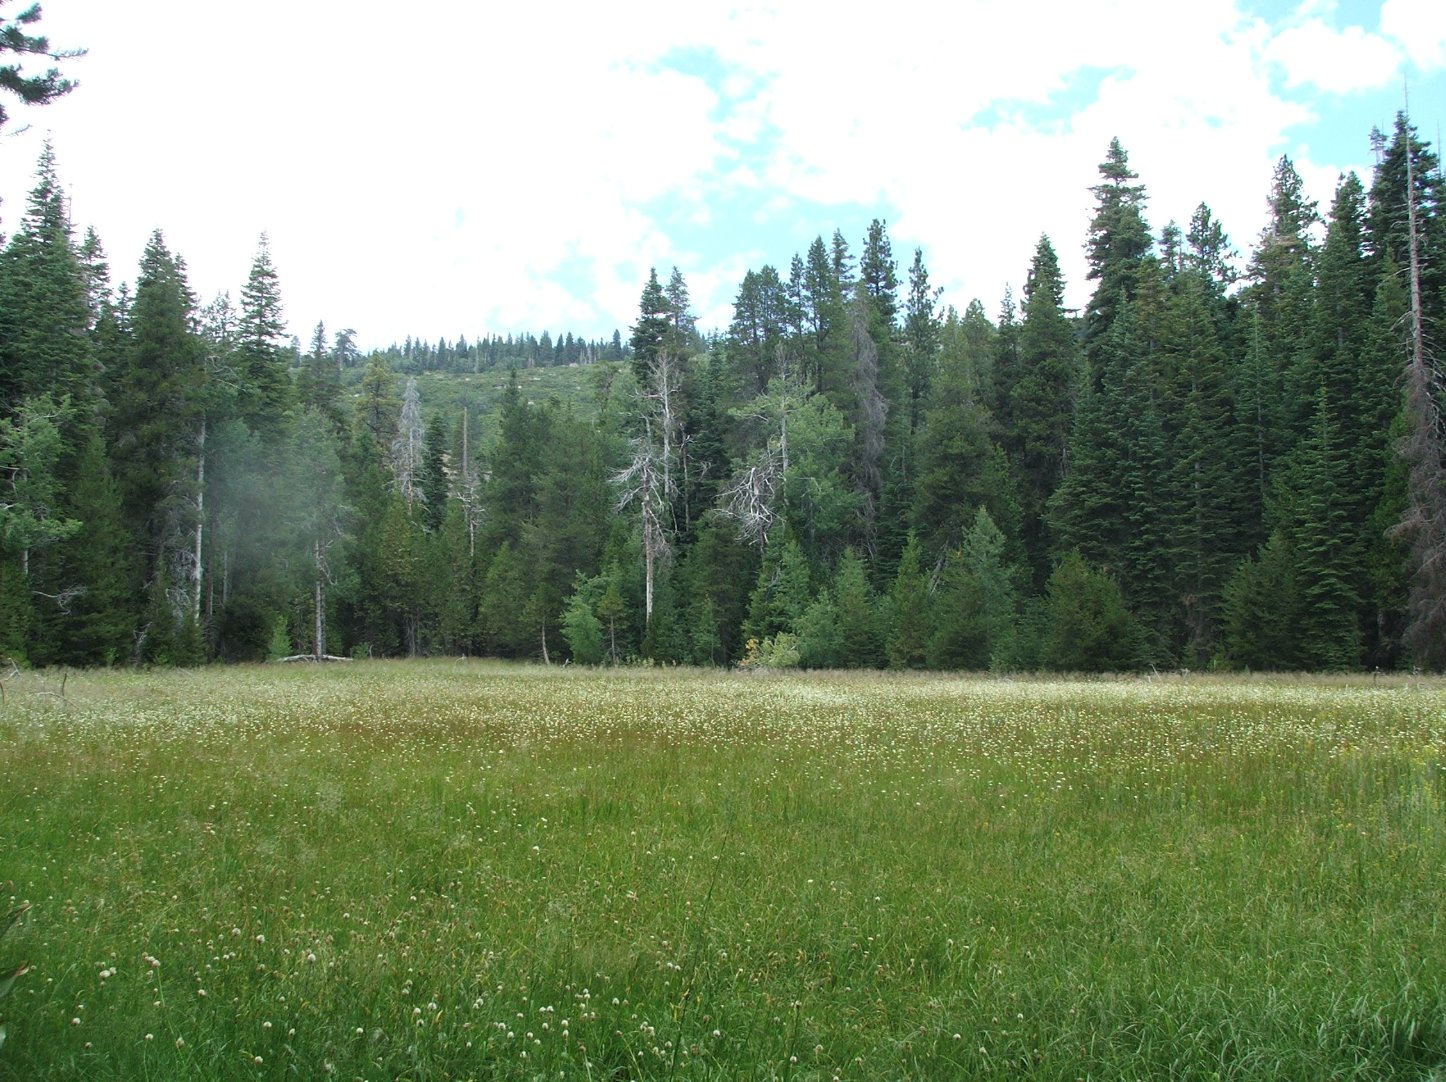 Government Meadow